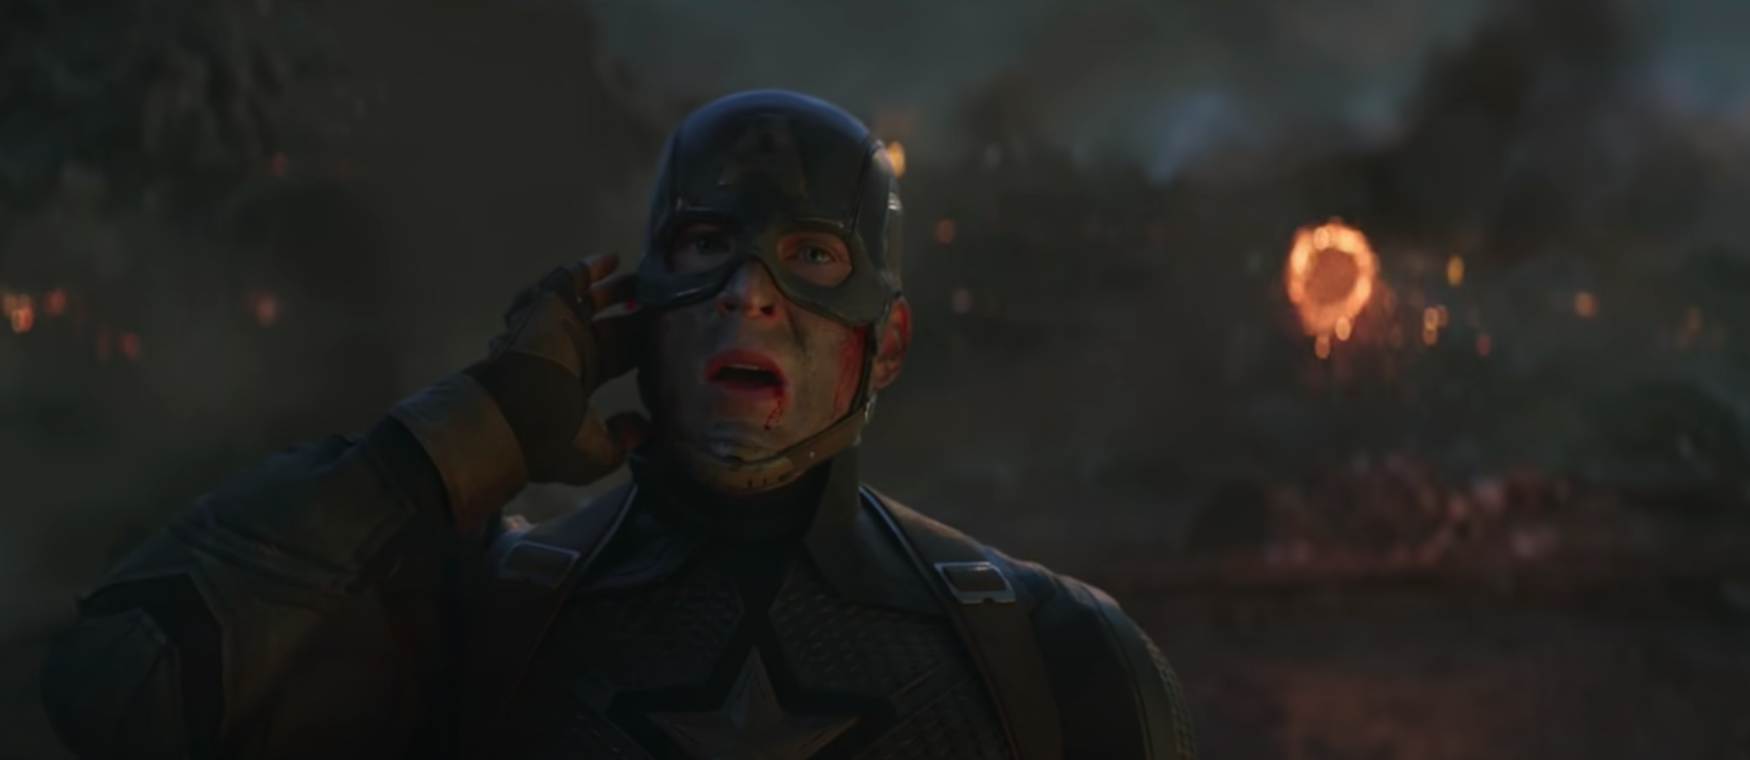 Captain America stands in a battlefield